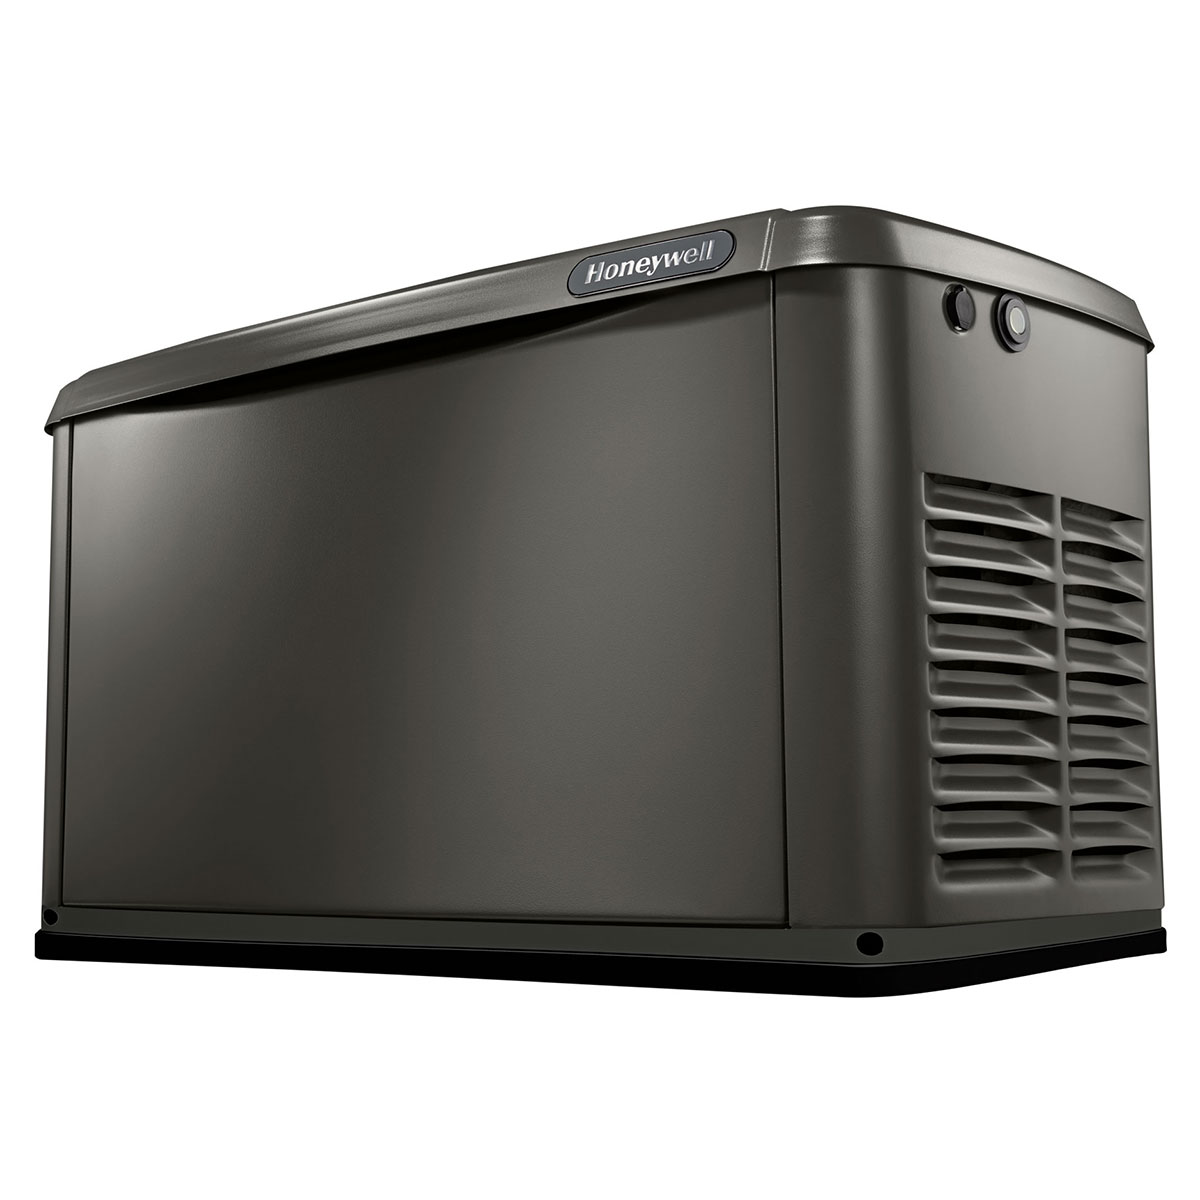 Honeywell 24kW Air Cooled Home Standby Generator, WiFi-Enabled - 7213